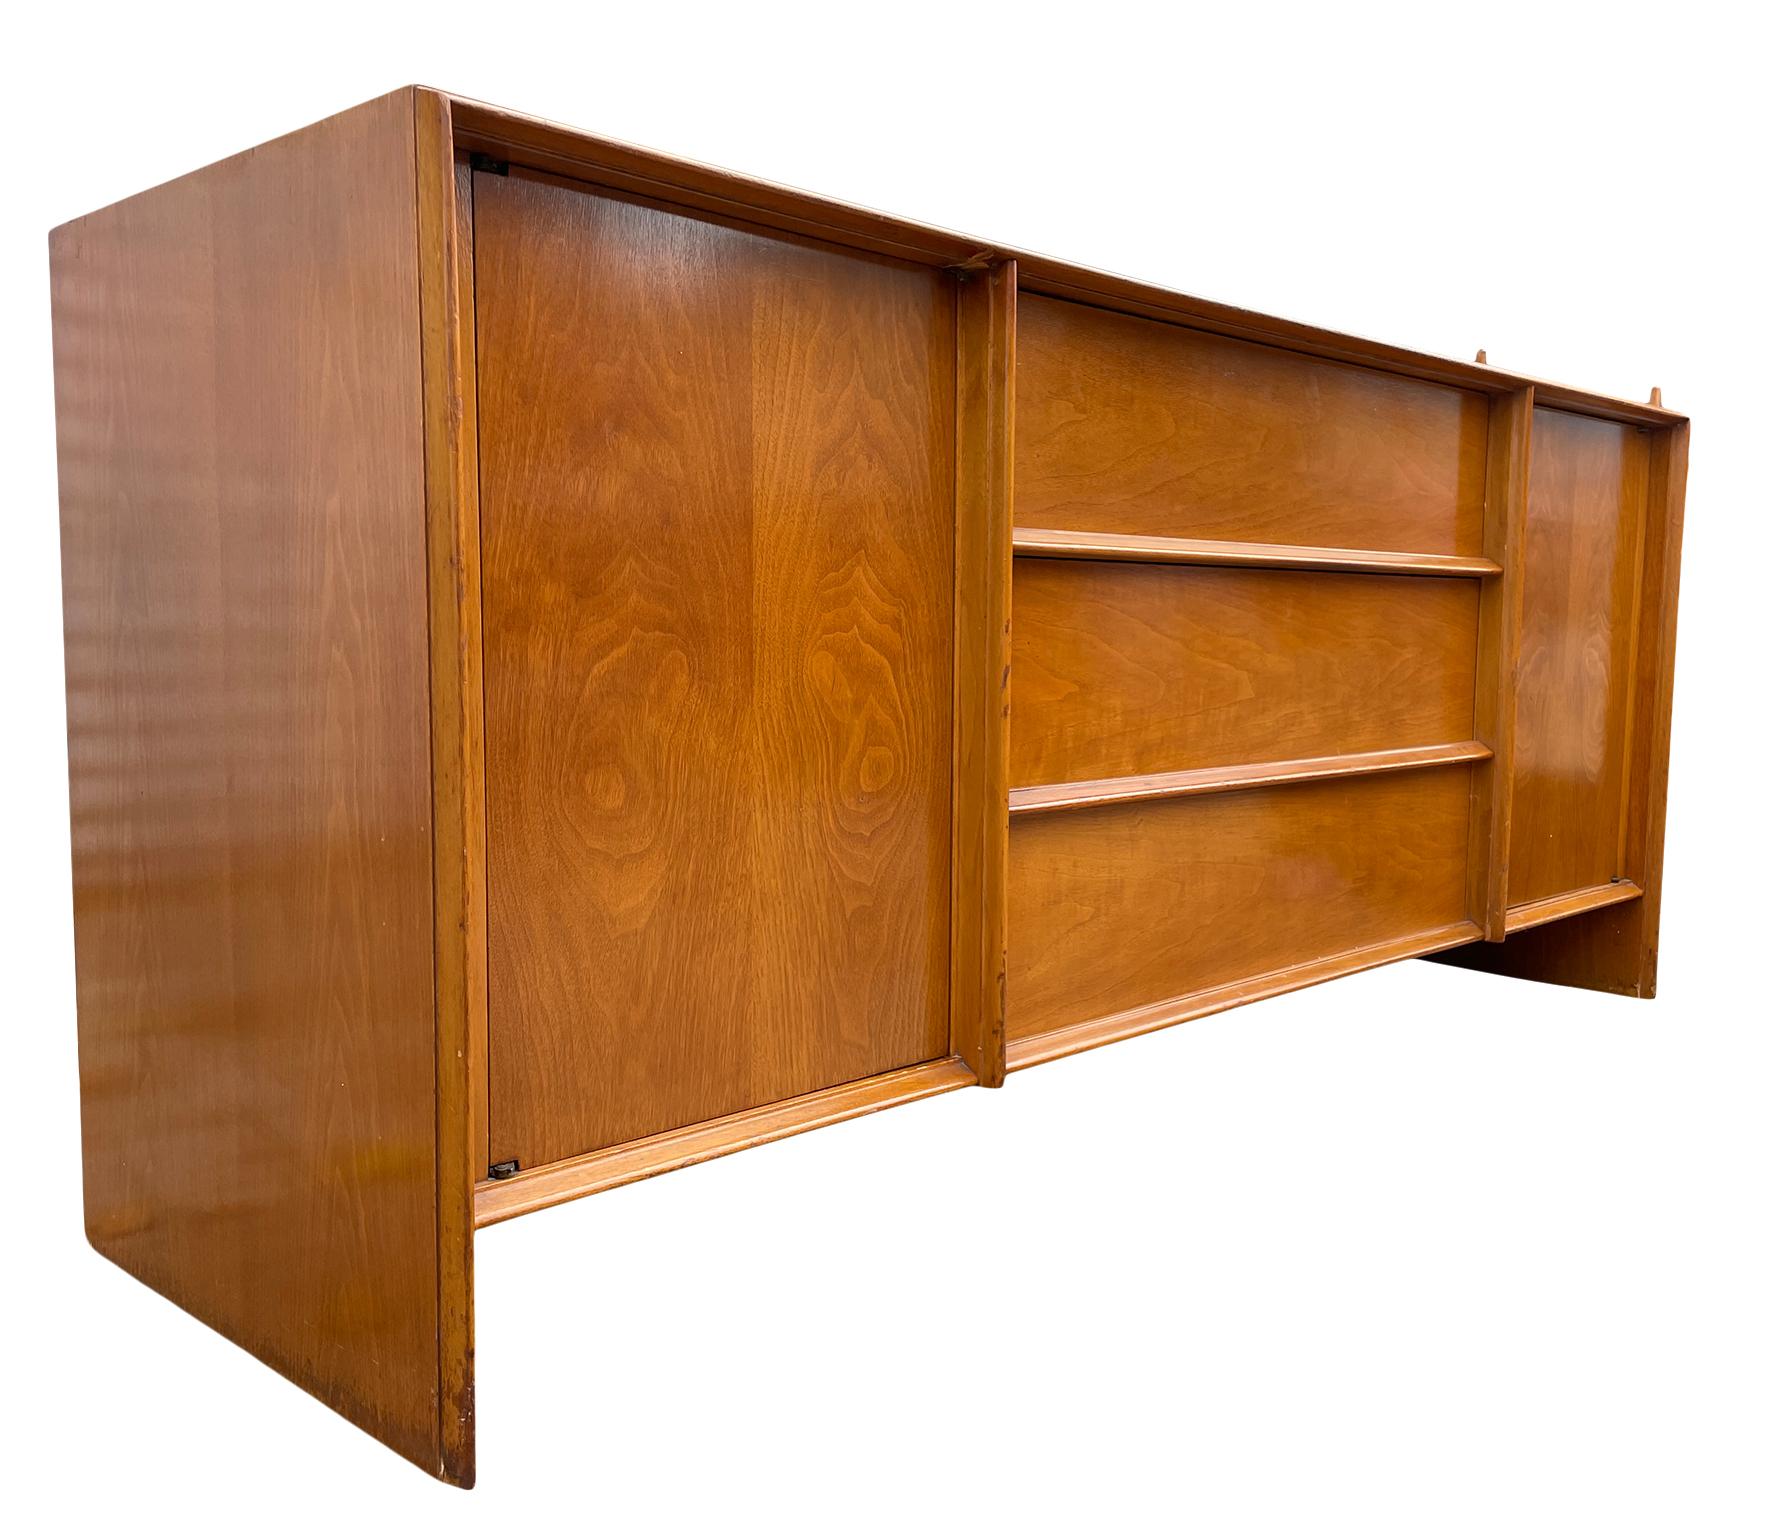 Beautiful 3 drawer Credenza sideboard by T.H. Robsjohn-Gibbings for Widdicomb 1